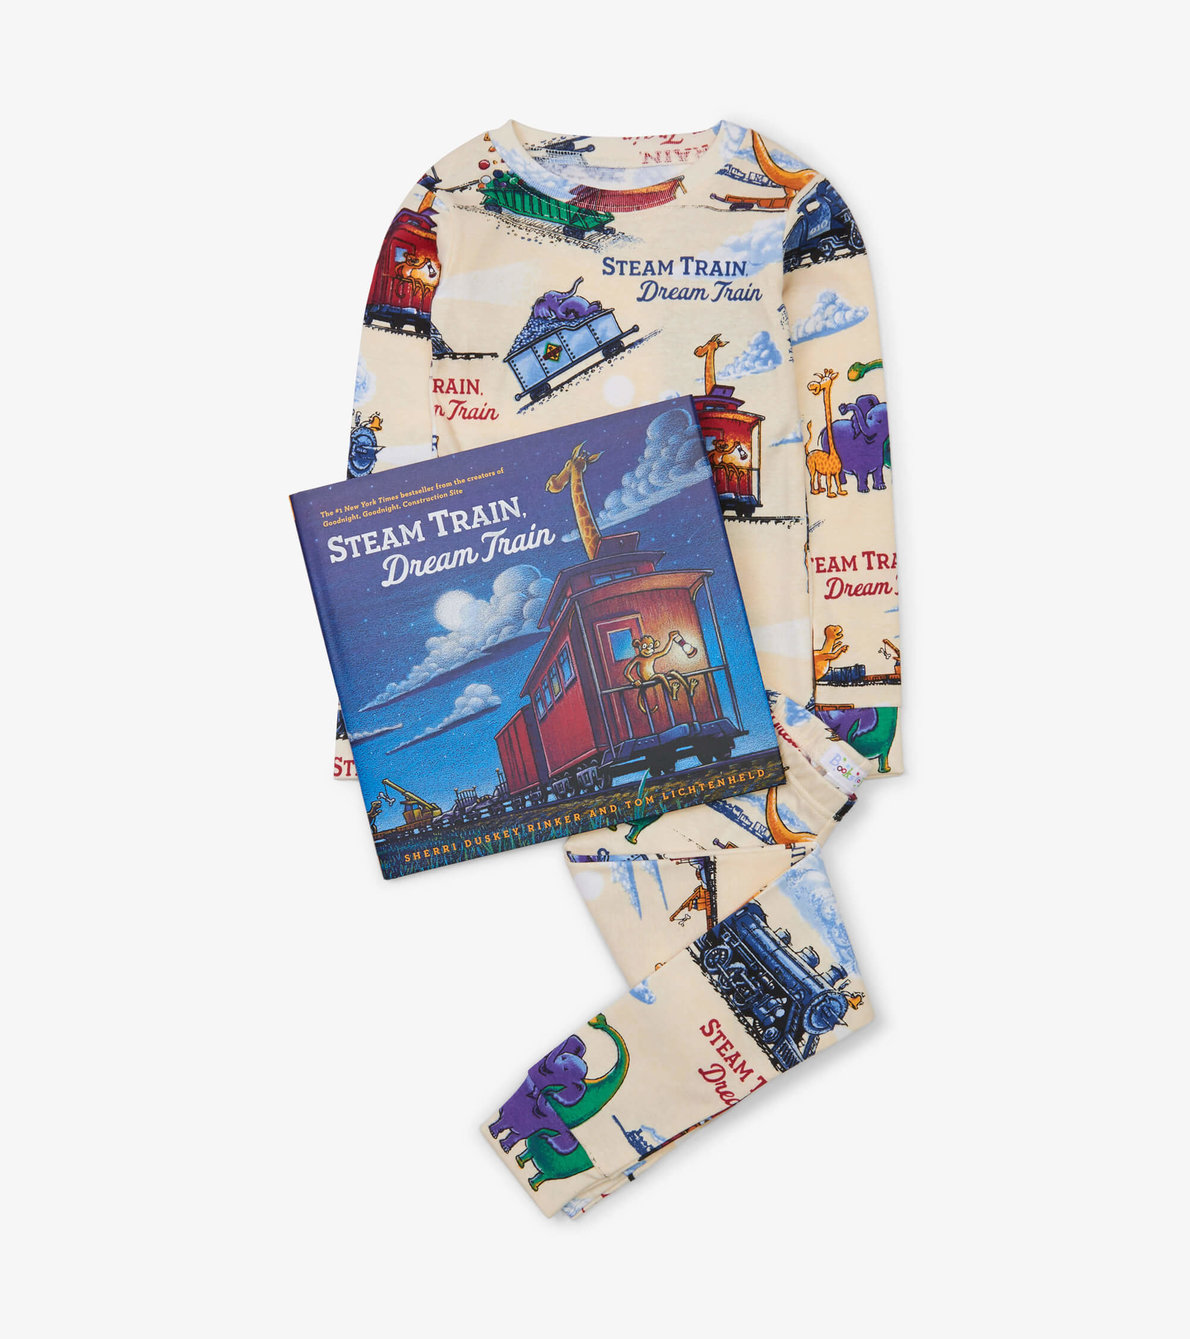 View larger image of Steam Train, Dream Train Book and Pajama Set